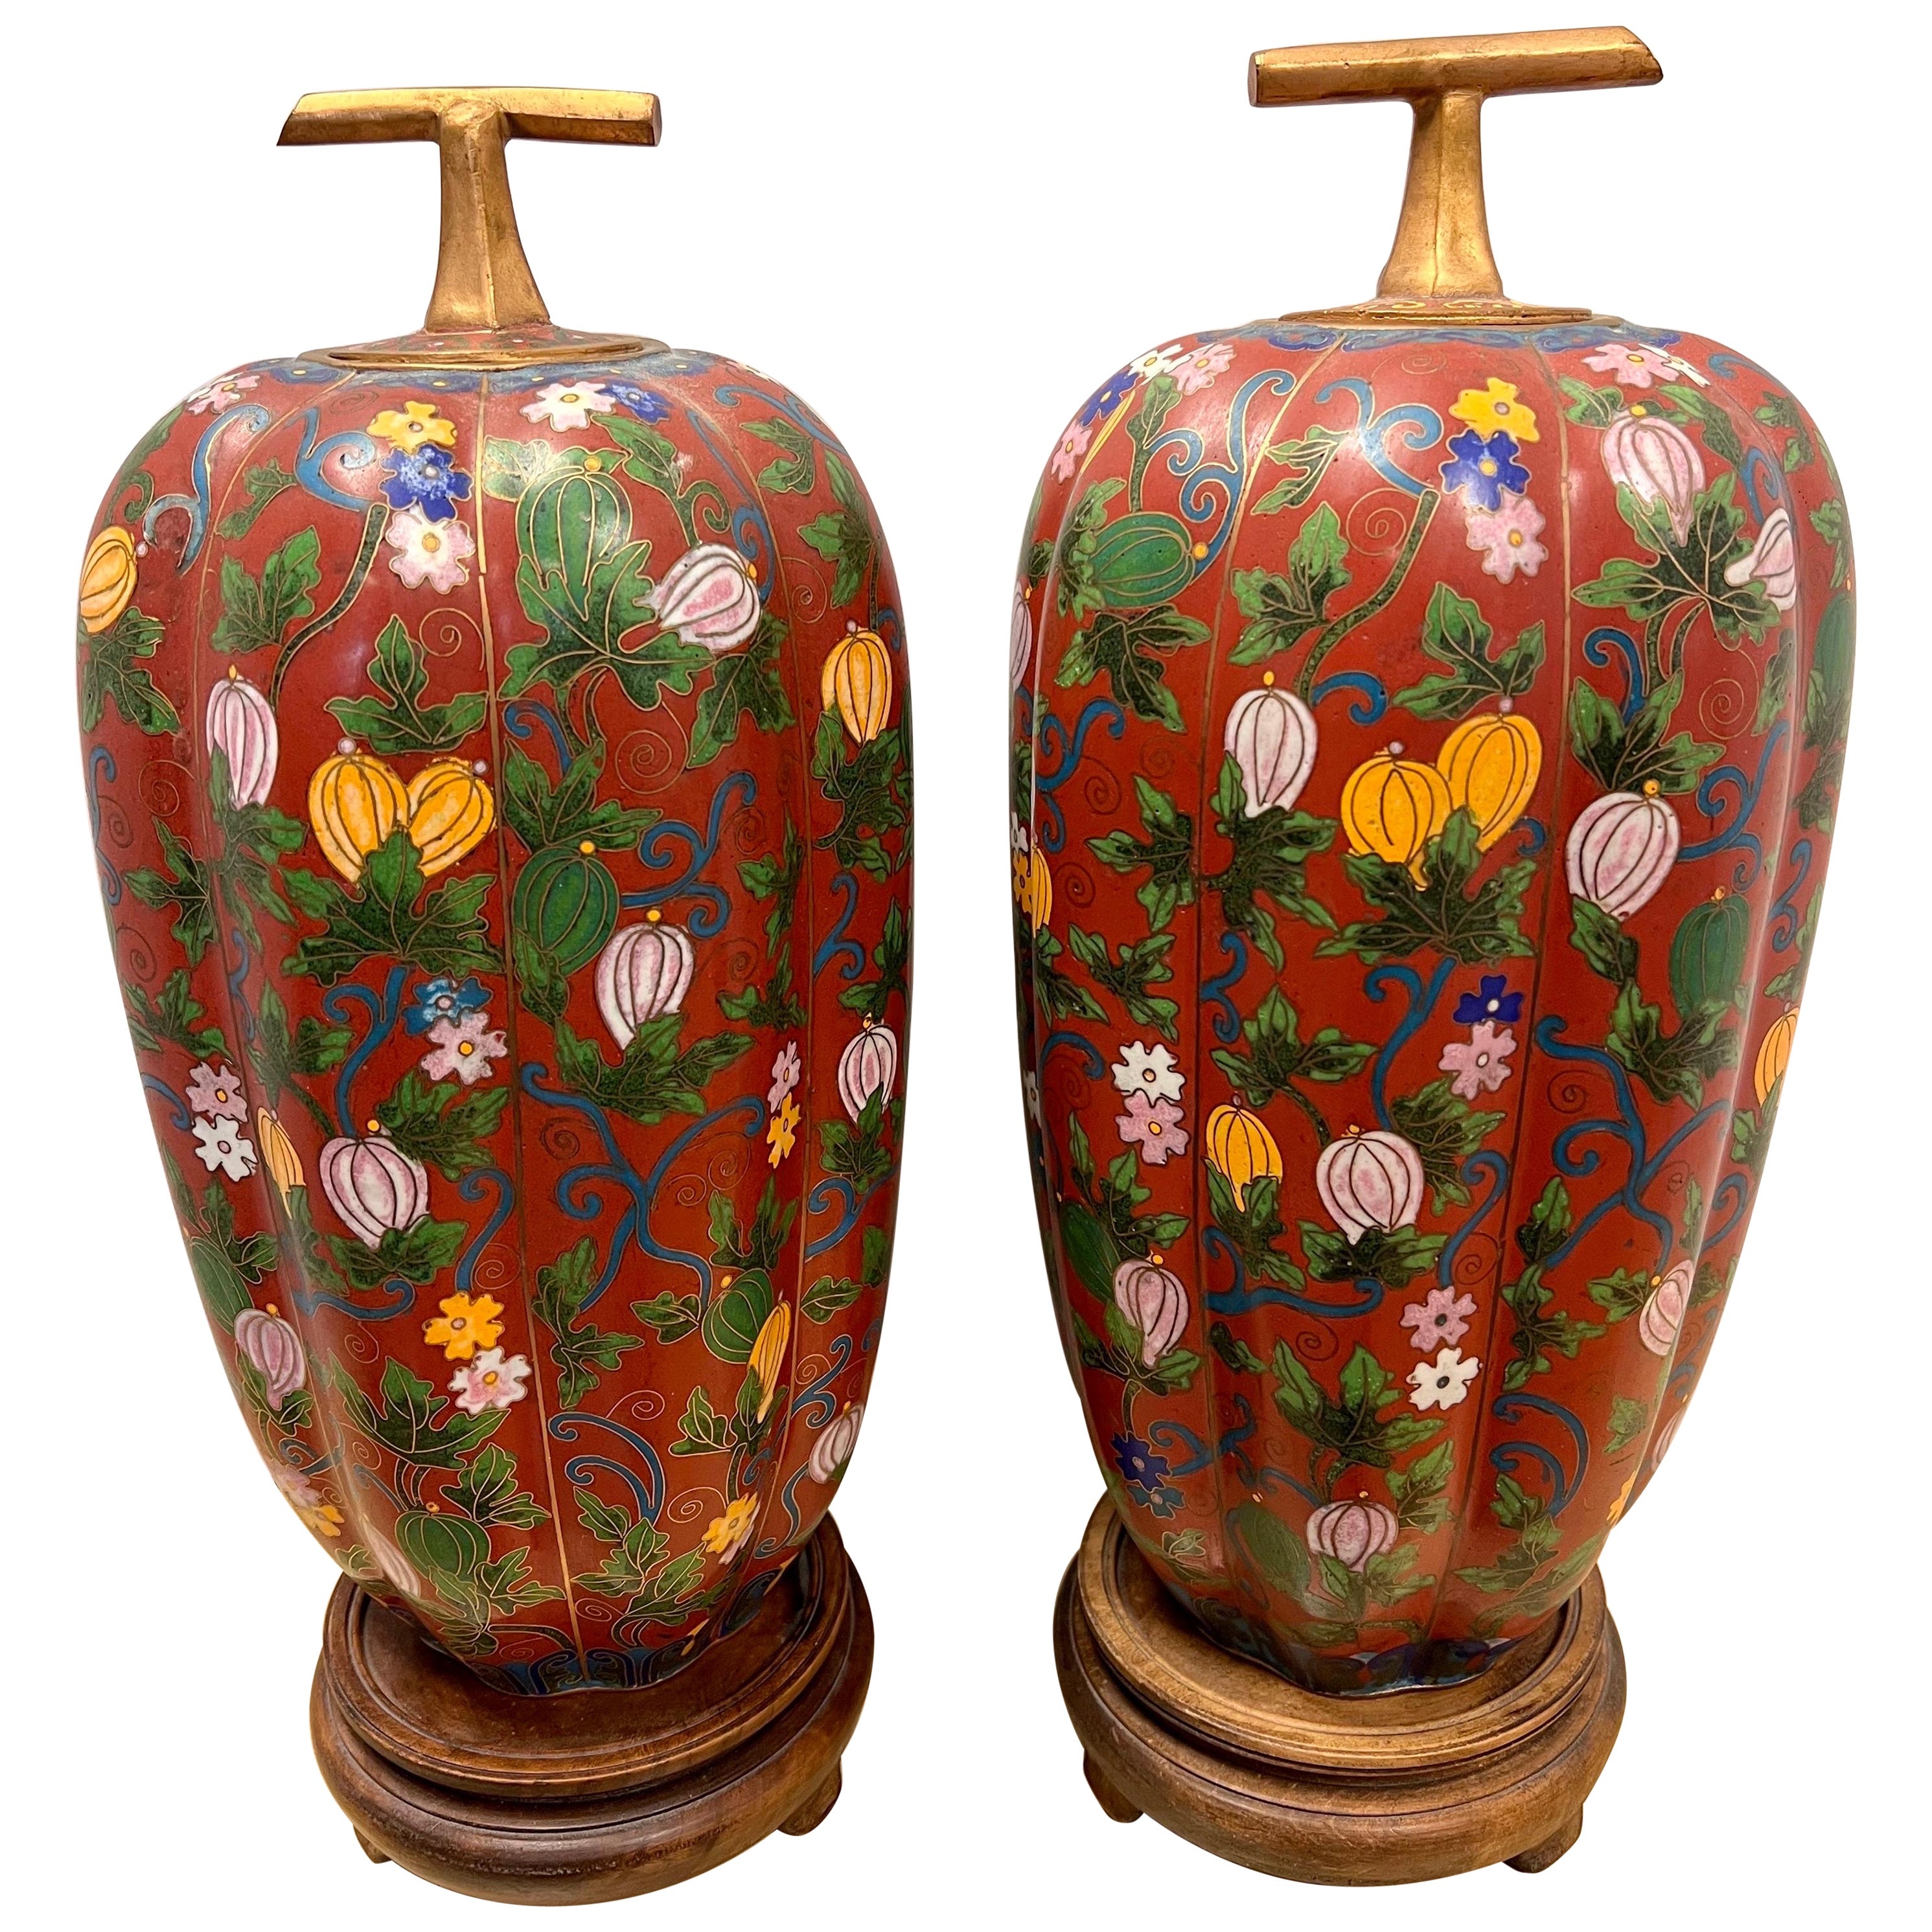 Pair of Chinese Red and Bronze Cloisonne Gourd Covered Urns Jars